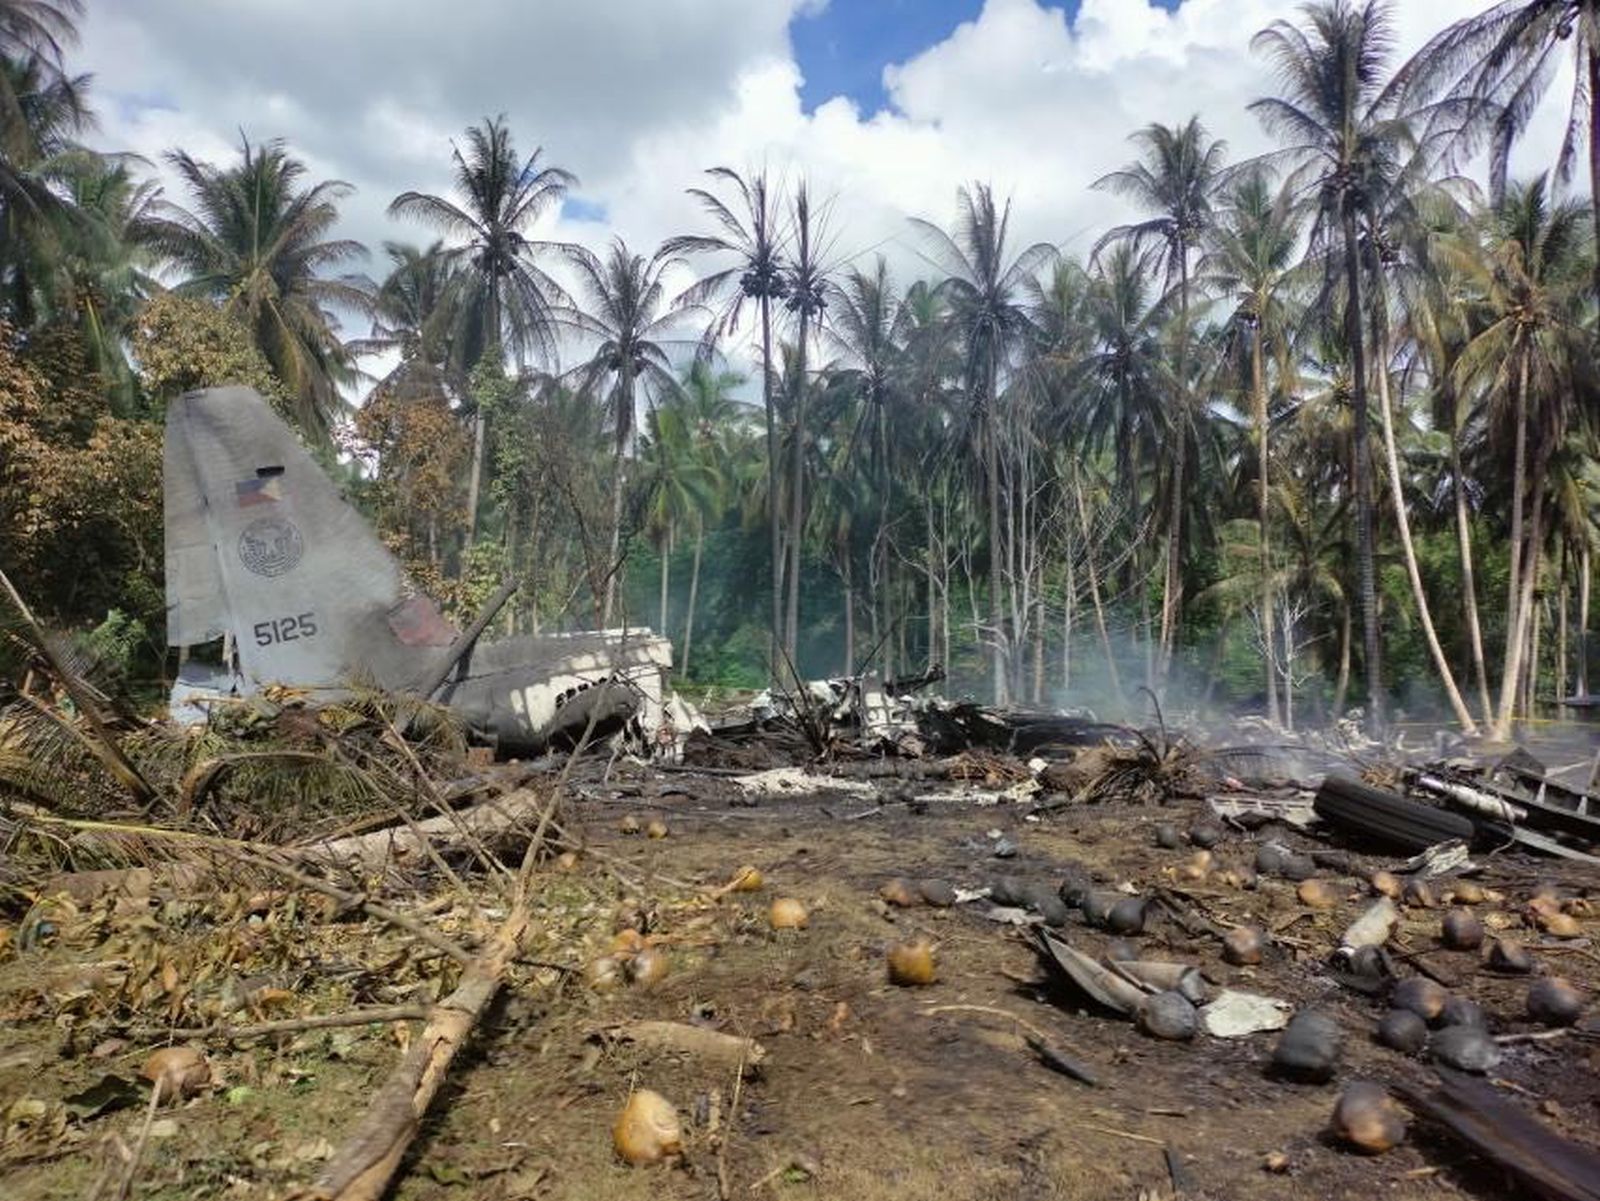 epa09321922 A handout photo made available by the Joint Task Force Jolo- Armed Forces of the Philippines (JTF-AFP) shows debris of a Philippine Air Force C-130 cargo plane at the vicinity of Jolo airport, Sulu island, Philippines, 04 July 2021. In a statement released by the office of Defense secretary Delfin Lorenzana, a C-130 aircraft of the Philippine Air Force crashed while landing at the Jolo airport on July 04,  with 92 soldiers on board including 3 pilots and 5 crew. As of the latest, 40 injured and wounded were rescued and 17 bodies recovered.  EPA/JTF HANDOUT  HANDOUT EDITORIAL USE ONLY/NO SALES